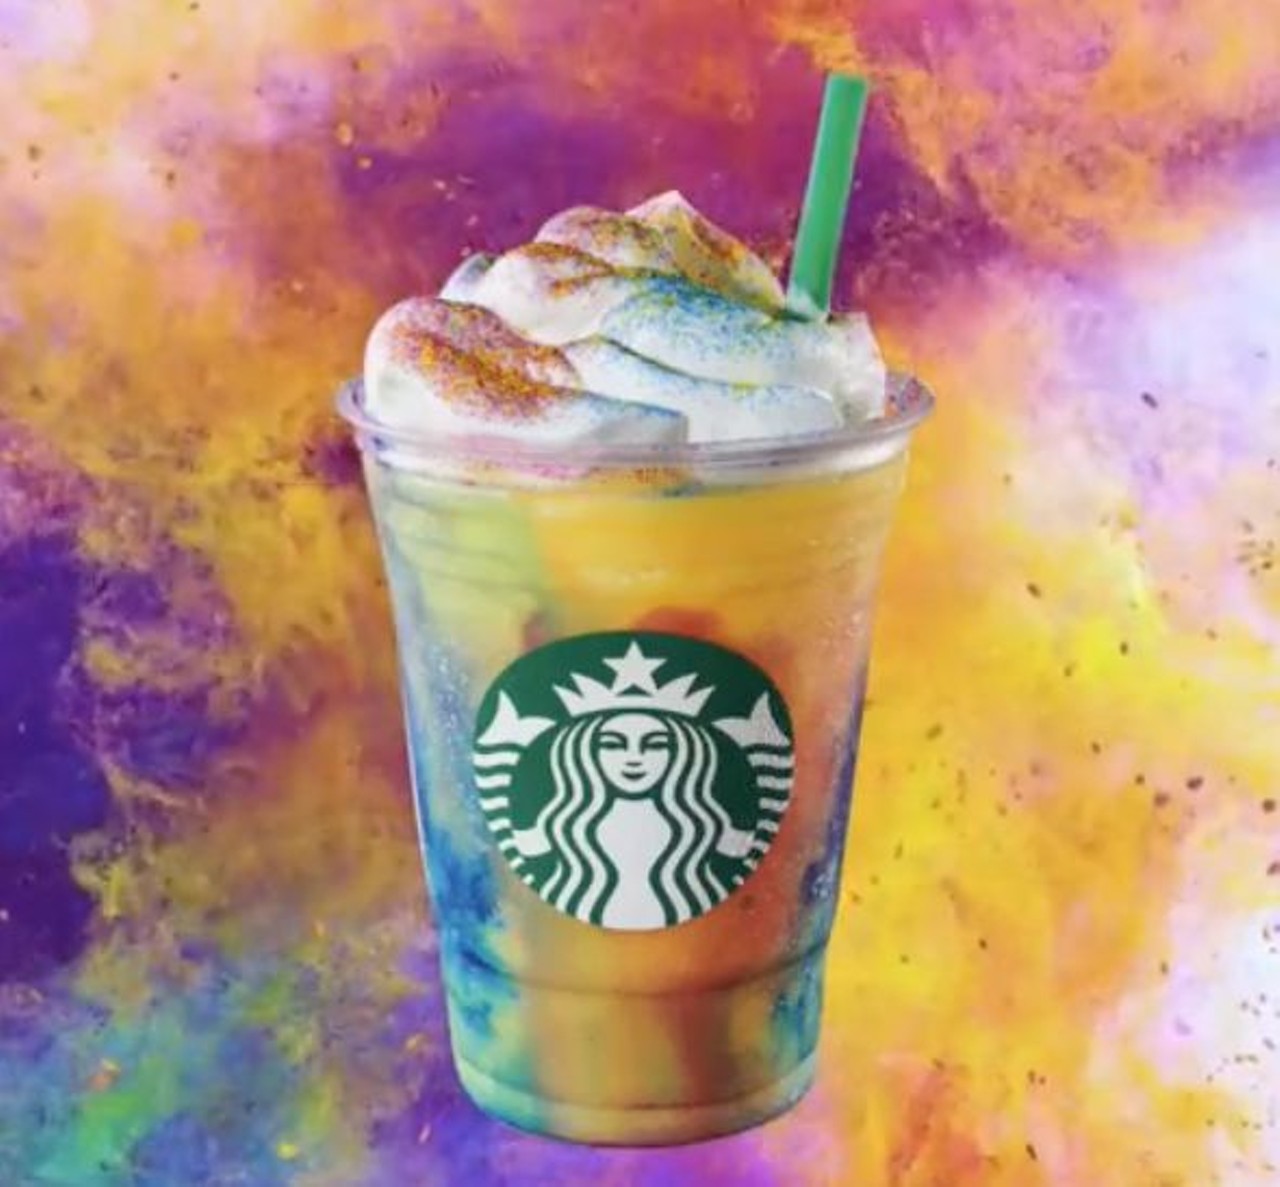 Starbucks
Multiple Locations 
Known as one of the most popular coffee vendors worldwide, Starbucks serves up specialty drinks including their famous frappuccinos. Flavors like caramel ribbon crunch and matcha green tea creme are served year round while limited time and secret menu items include the TieDye, Cotton Candy, Cookie Dough, Ferrero Rocher and more.
Photo via Instagram/Starbucks Coffee